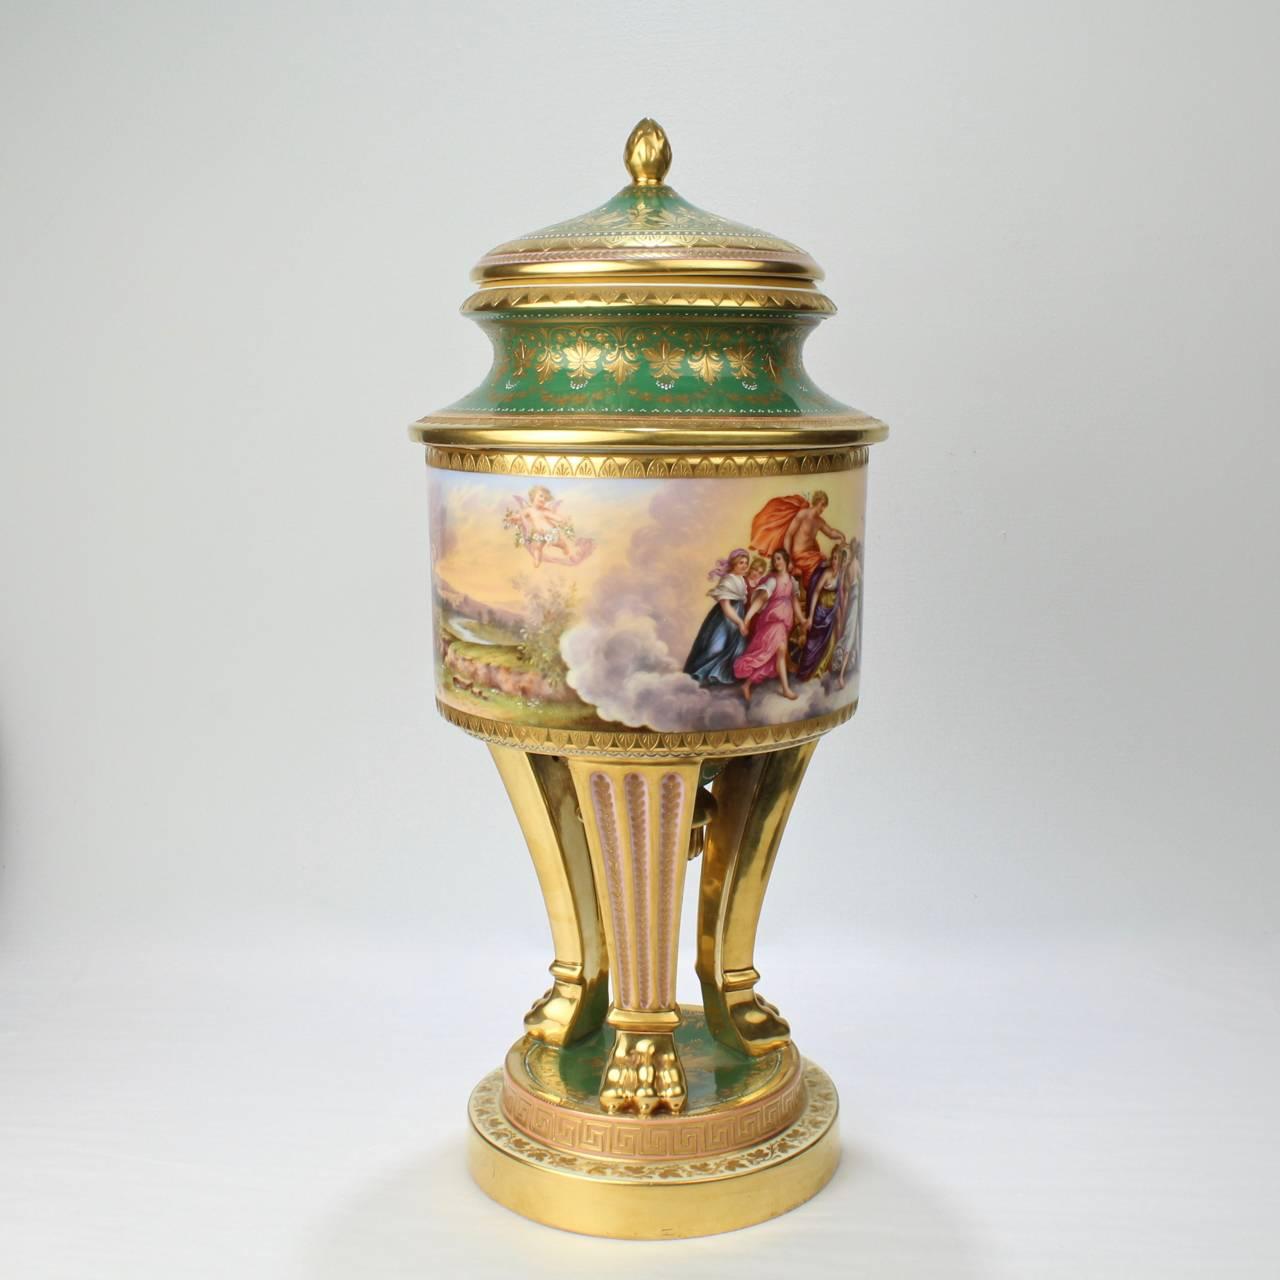 A large, heavily gilt Royal Vienna porcelain covered urn of exceptional quality. 

With hand painted scenes of Aurora and the Triumph of Venus around the body.

Constructed in three pieces with a lid and a second central section resting on a